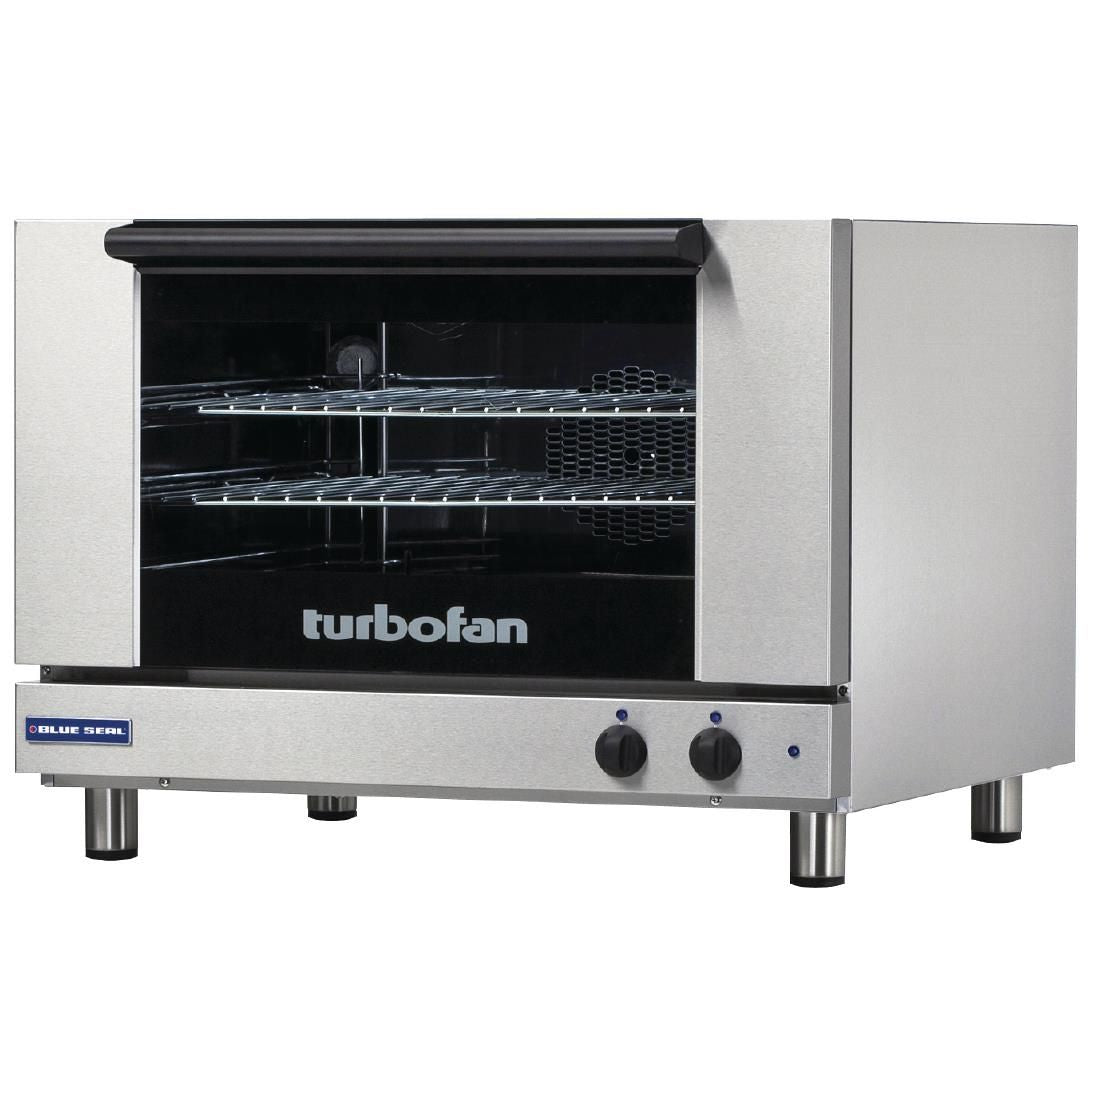 DL444 Blue Seal Turbofan Convection Oven E27M2 JD Catering Equipment Solutions Ltd